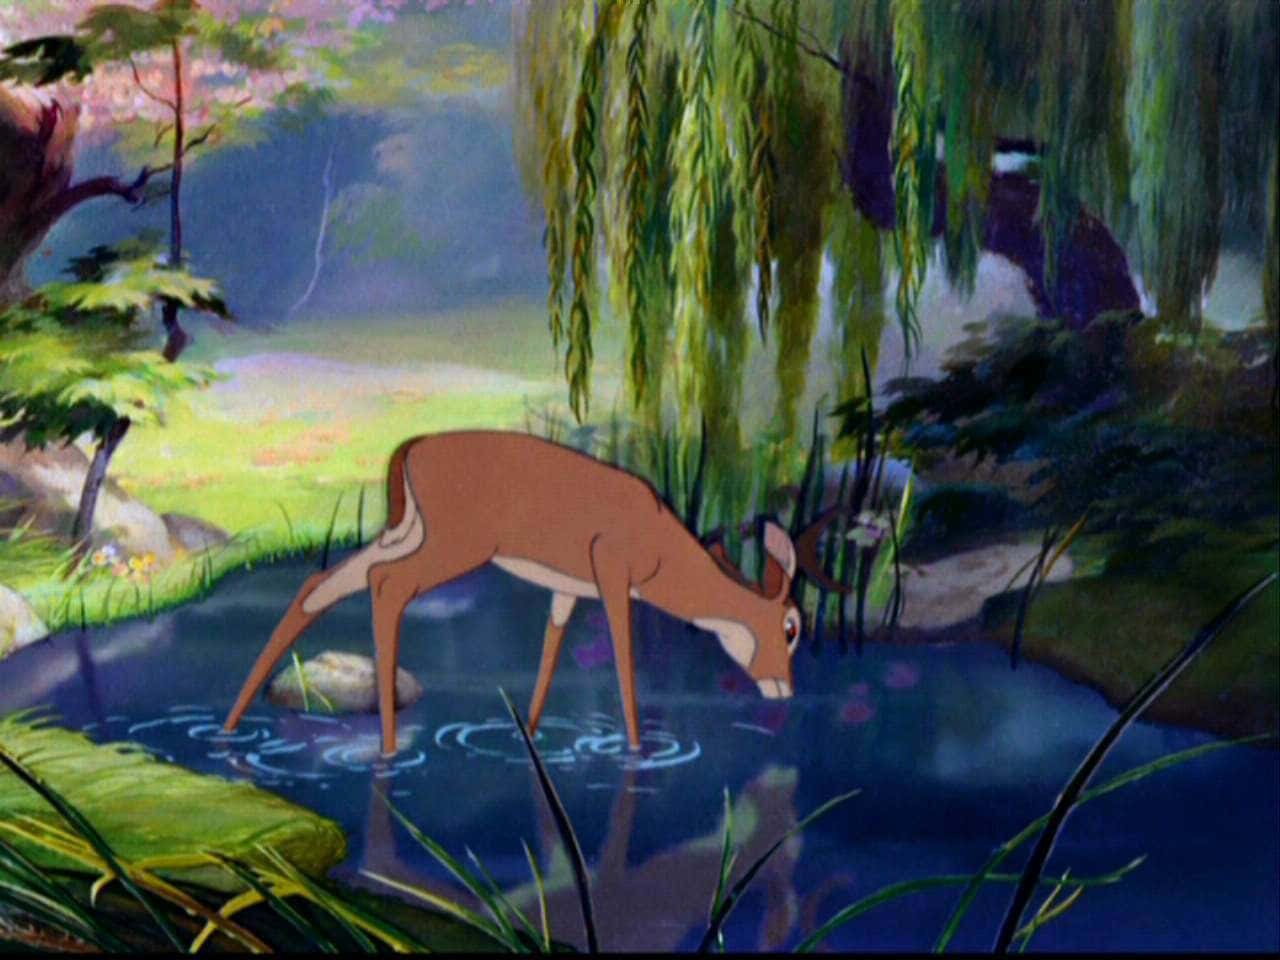 Bambi, the beloved deer from Disney's classic film